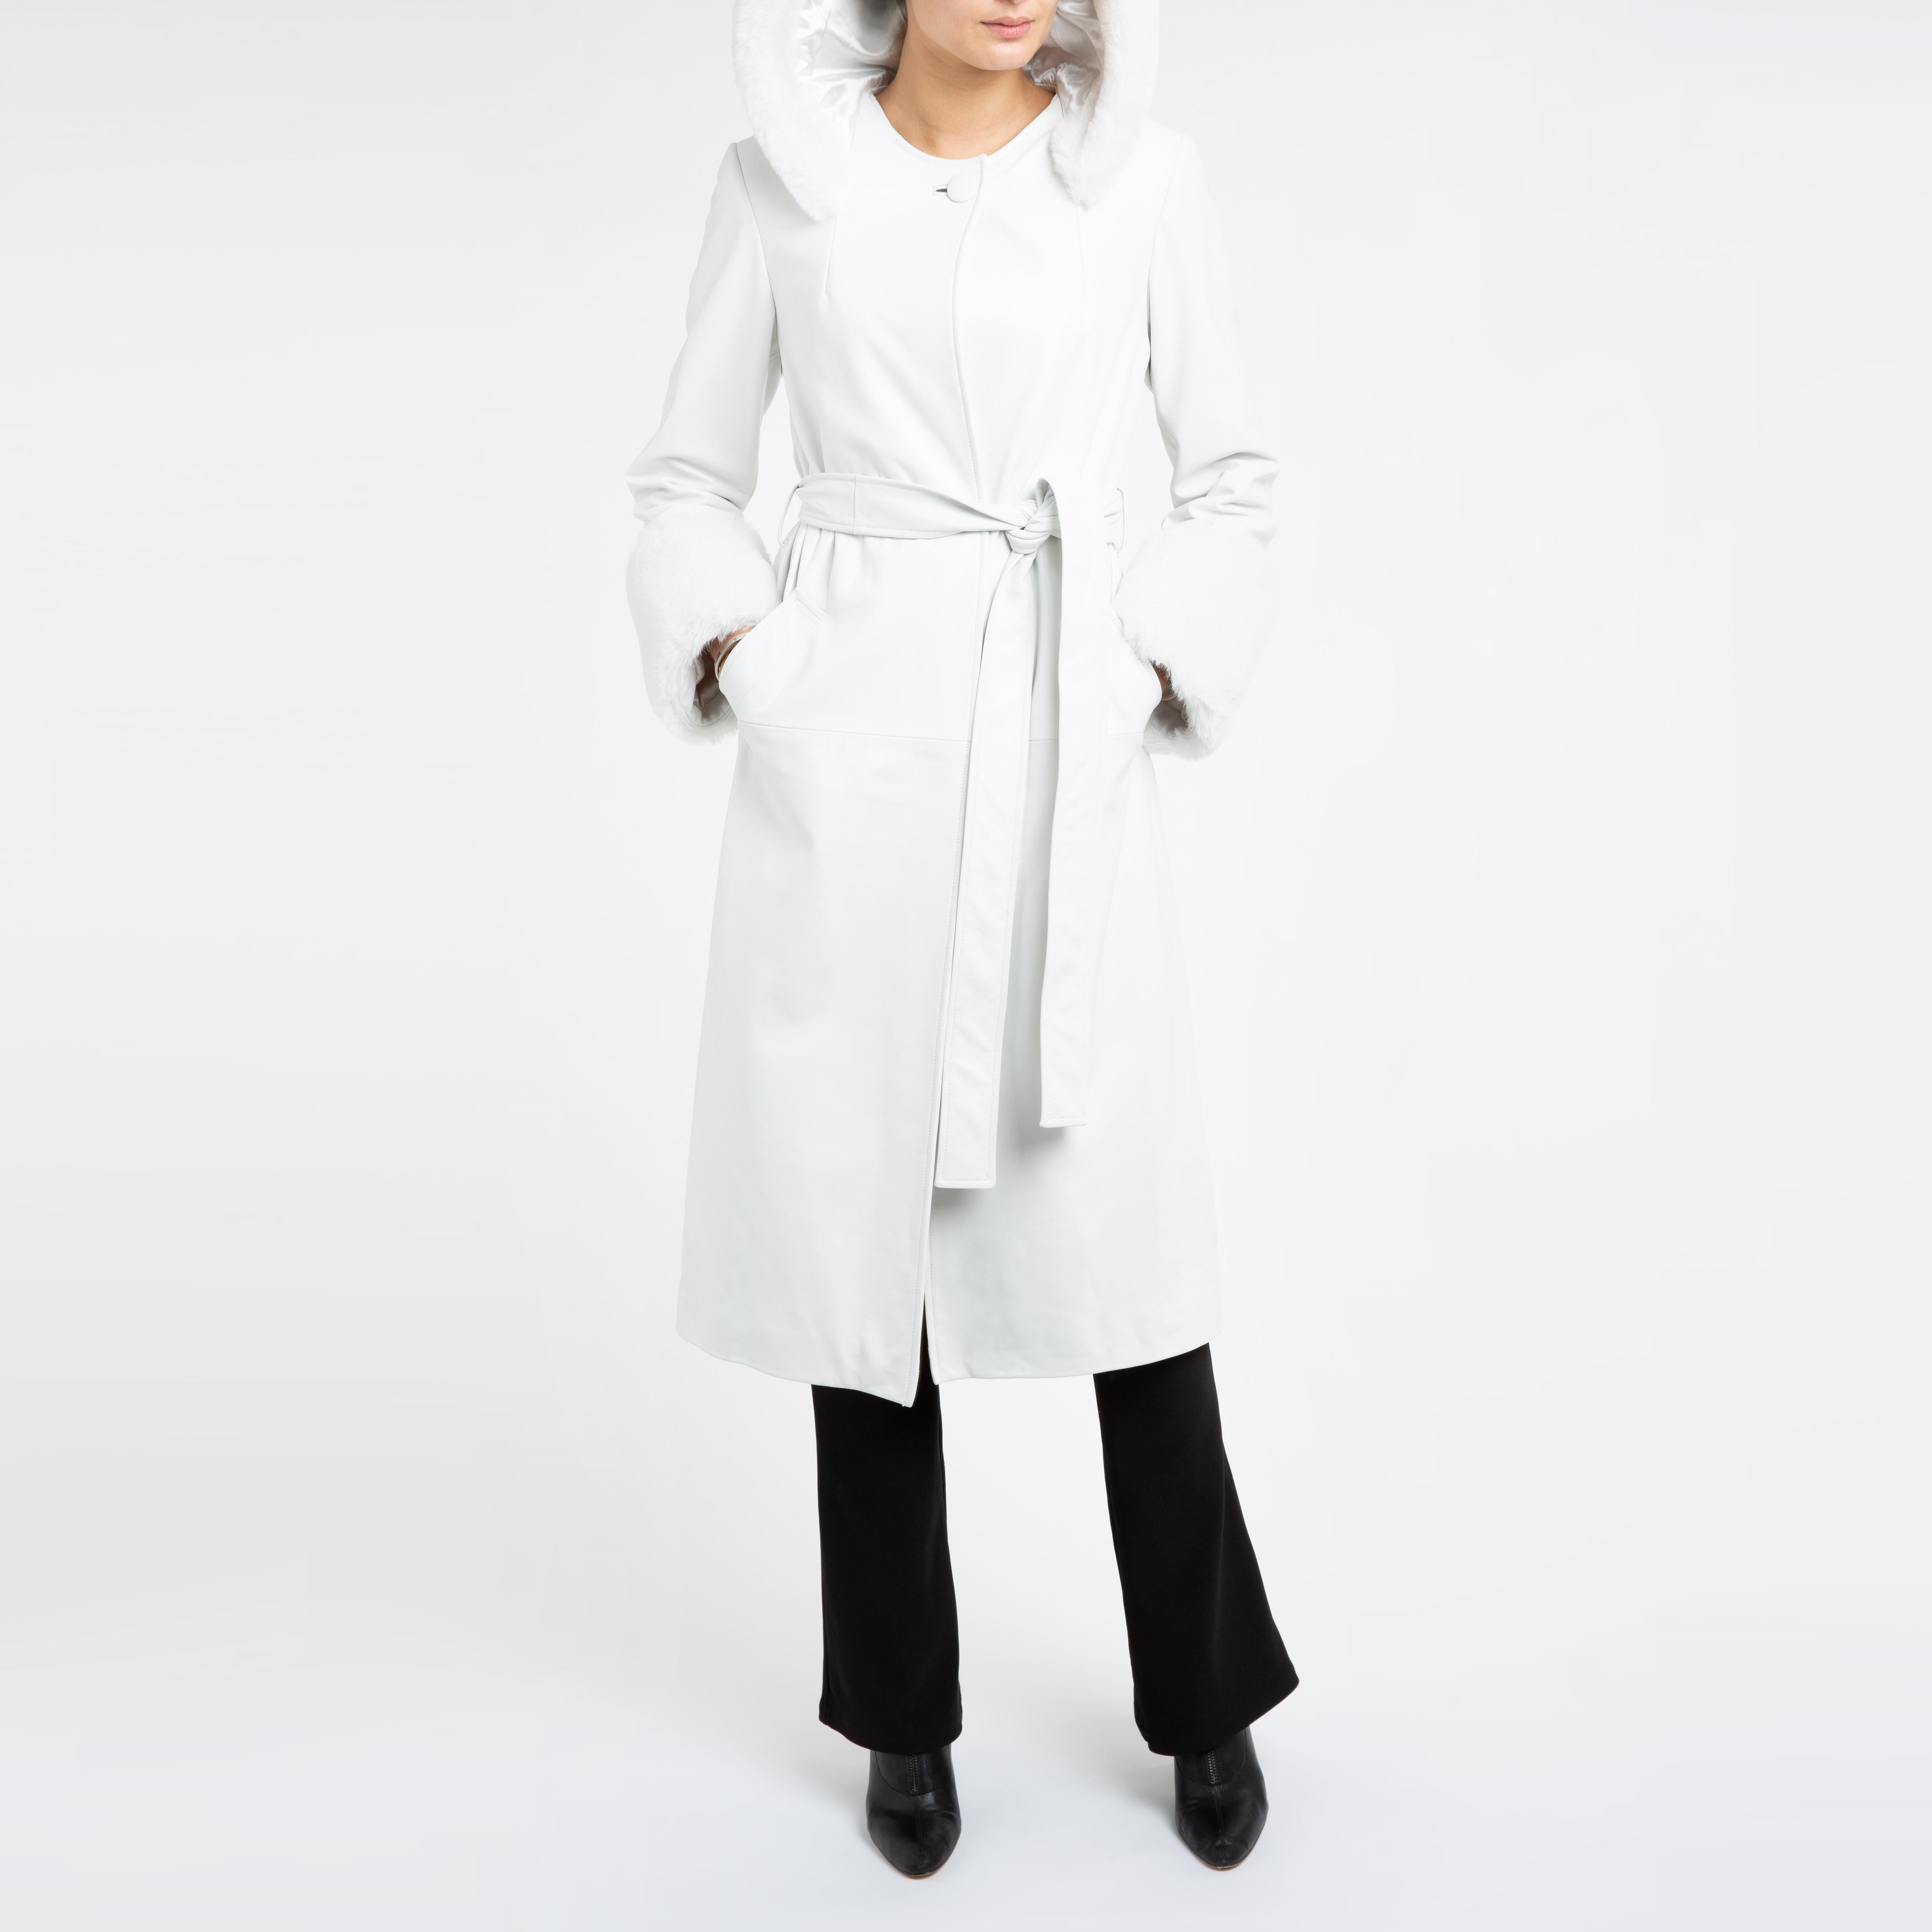 Verheyen Aurora Hooded Leather Trench Coat in White with Faux Fur - Size uk 10 For Sale 4